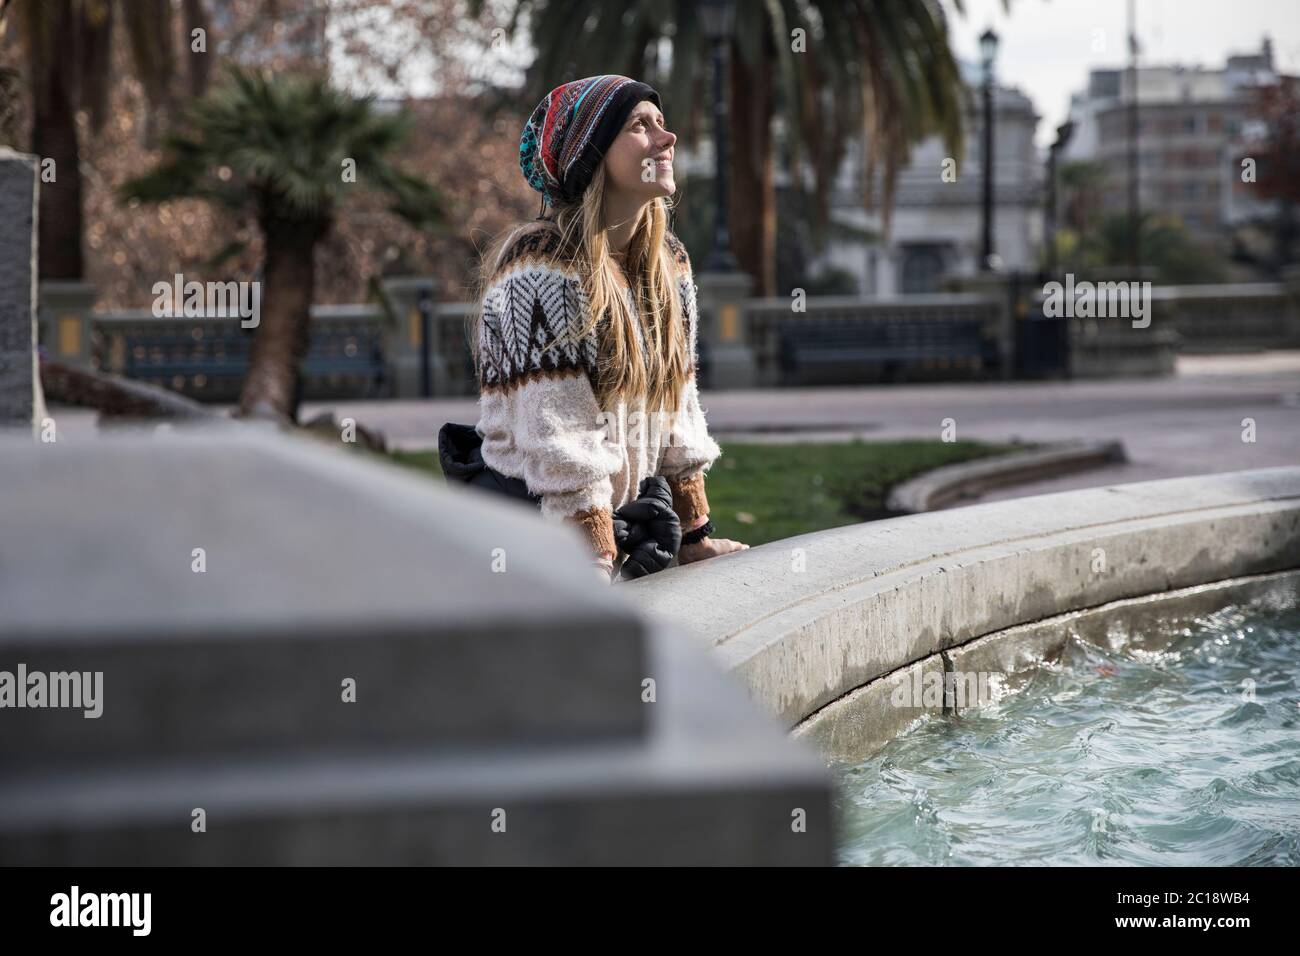 beautiful young blond woman near a water fountain looking up smiling Stock Photo